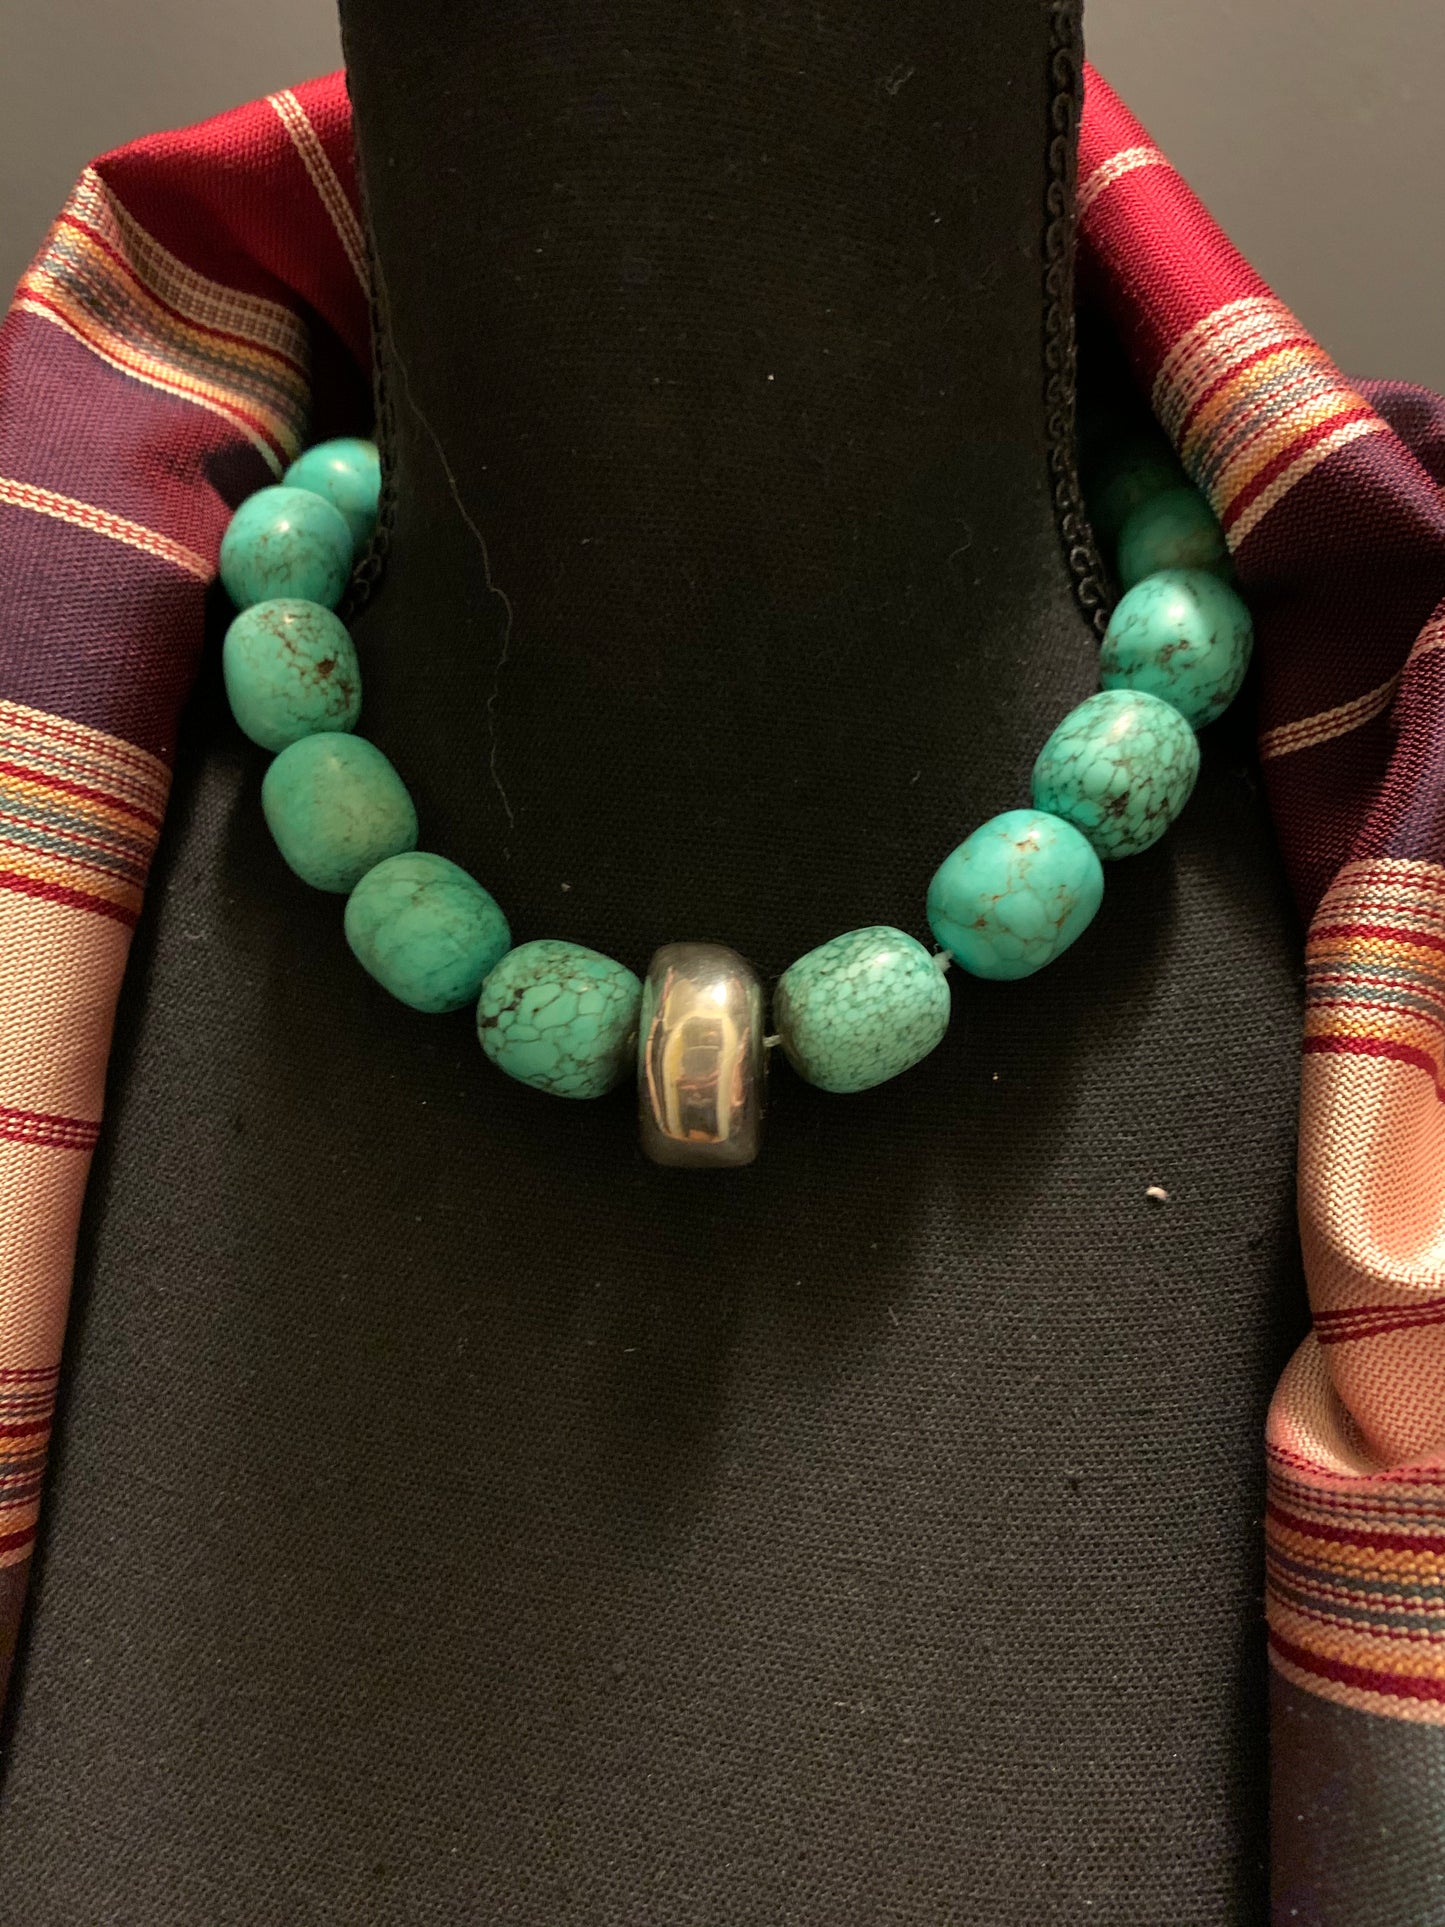 A vintage turquoise necklace